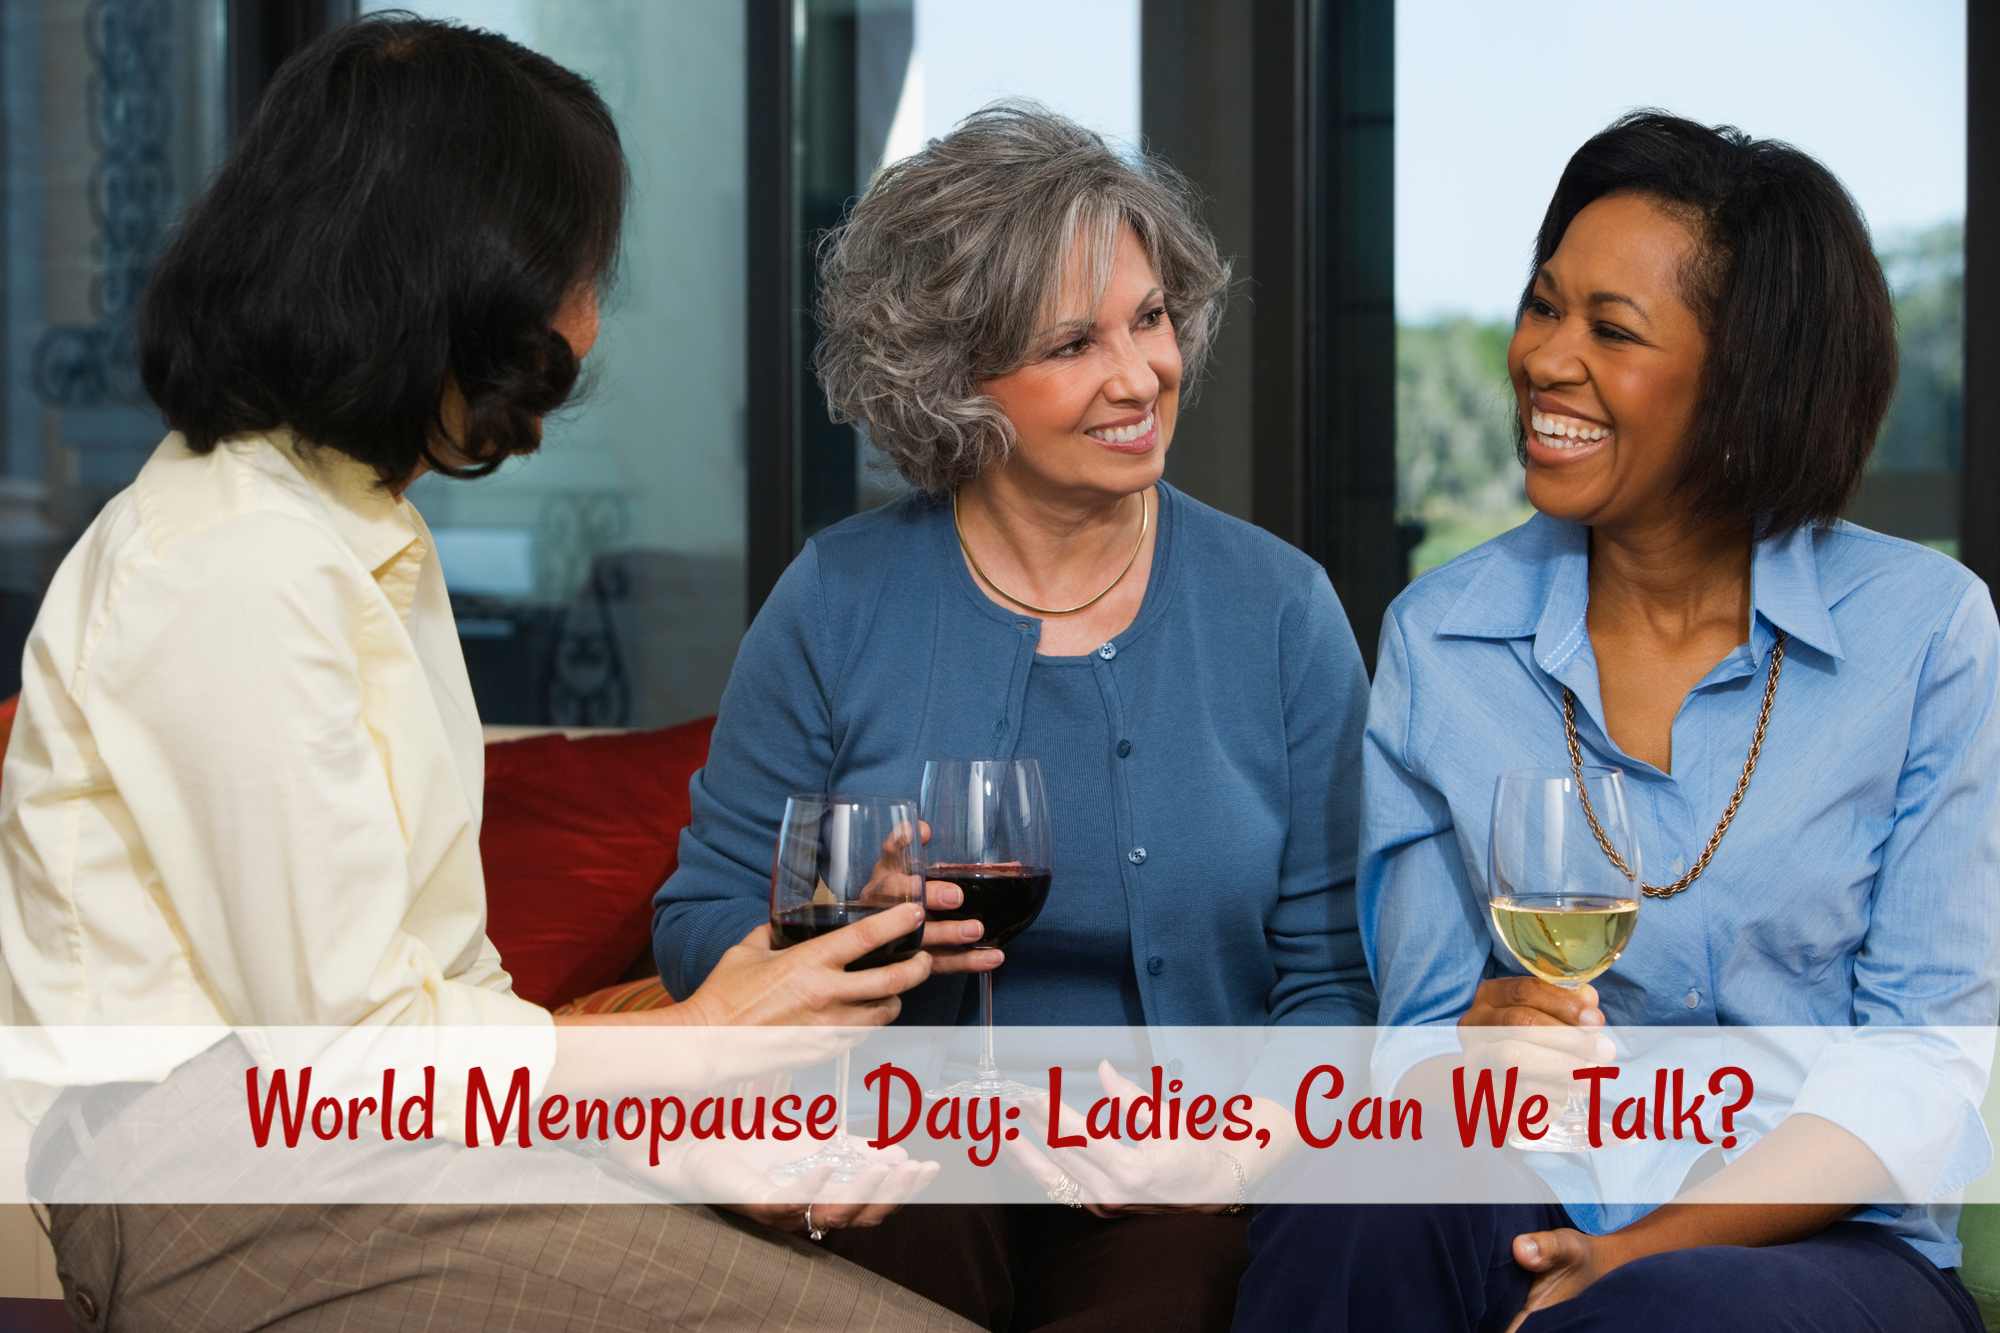 World Menopause Day: Ladies, Can We Talk?